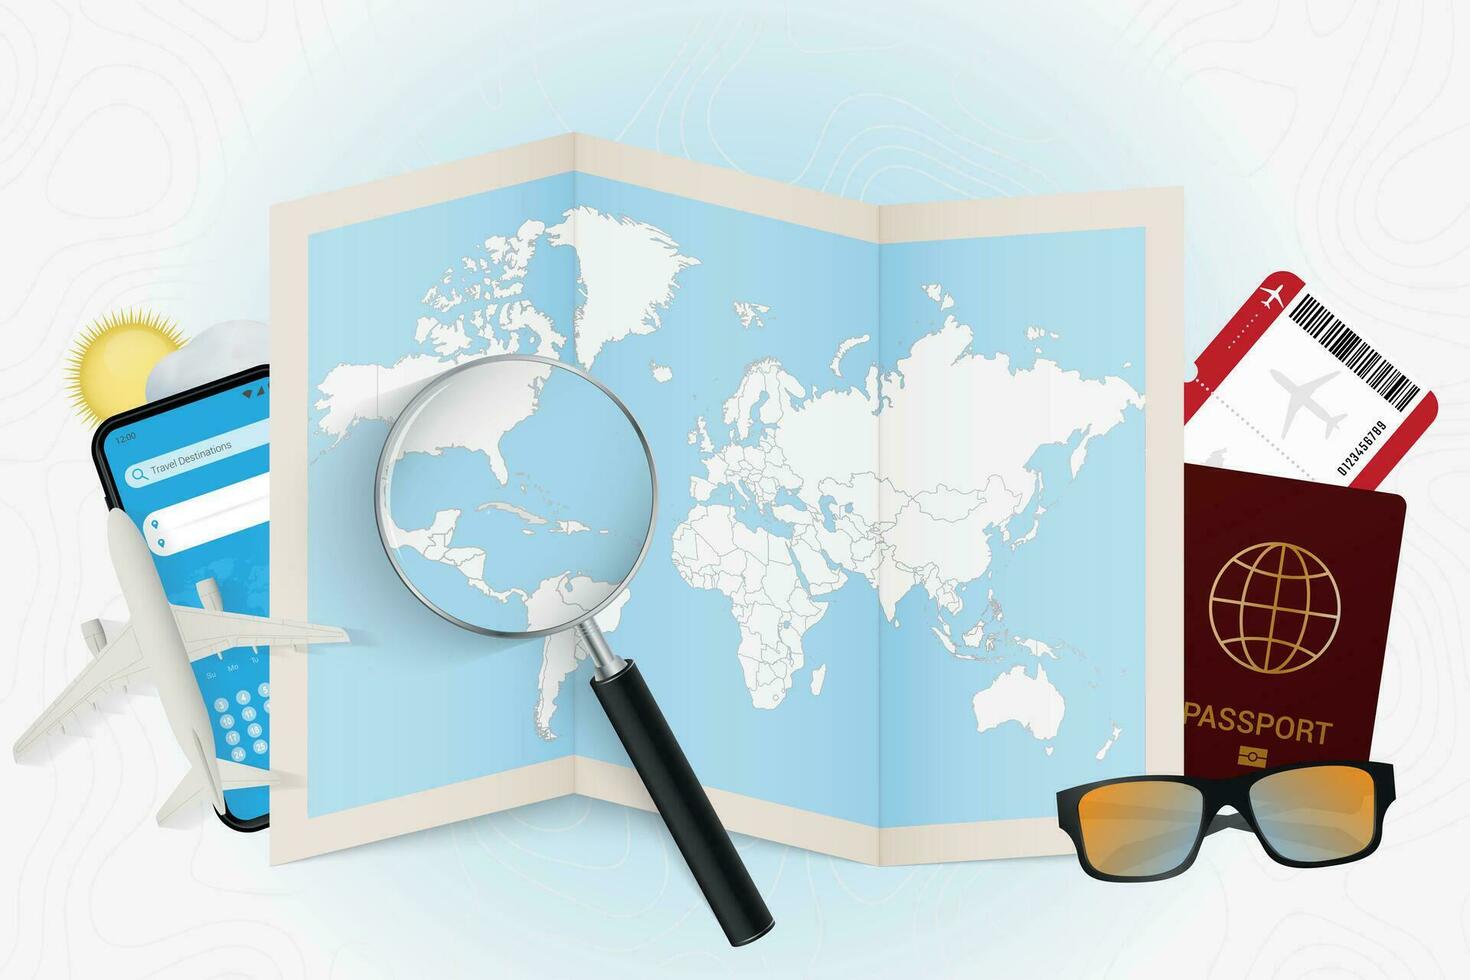 Travel destination Cuba, tourism mockup with travel equipment and world map with magnifying glass on a Cuba. vector